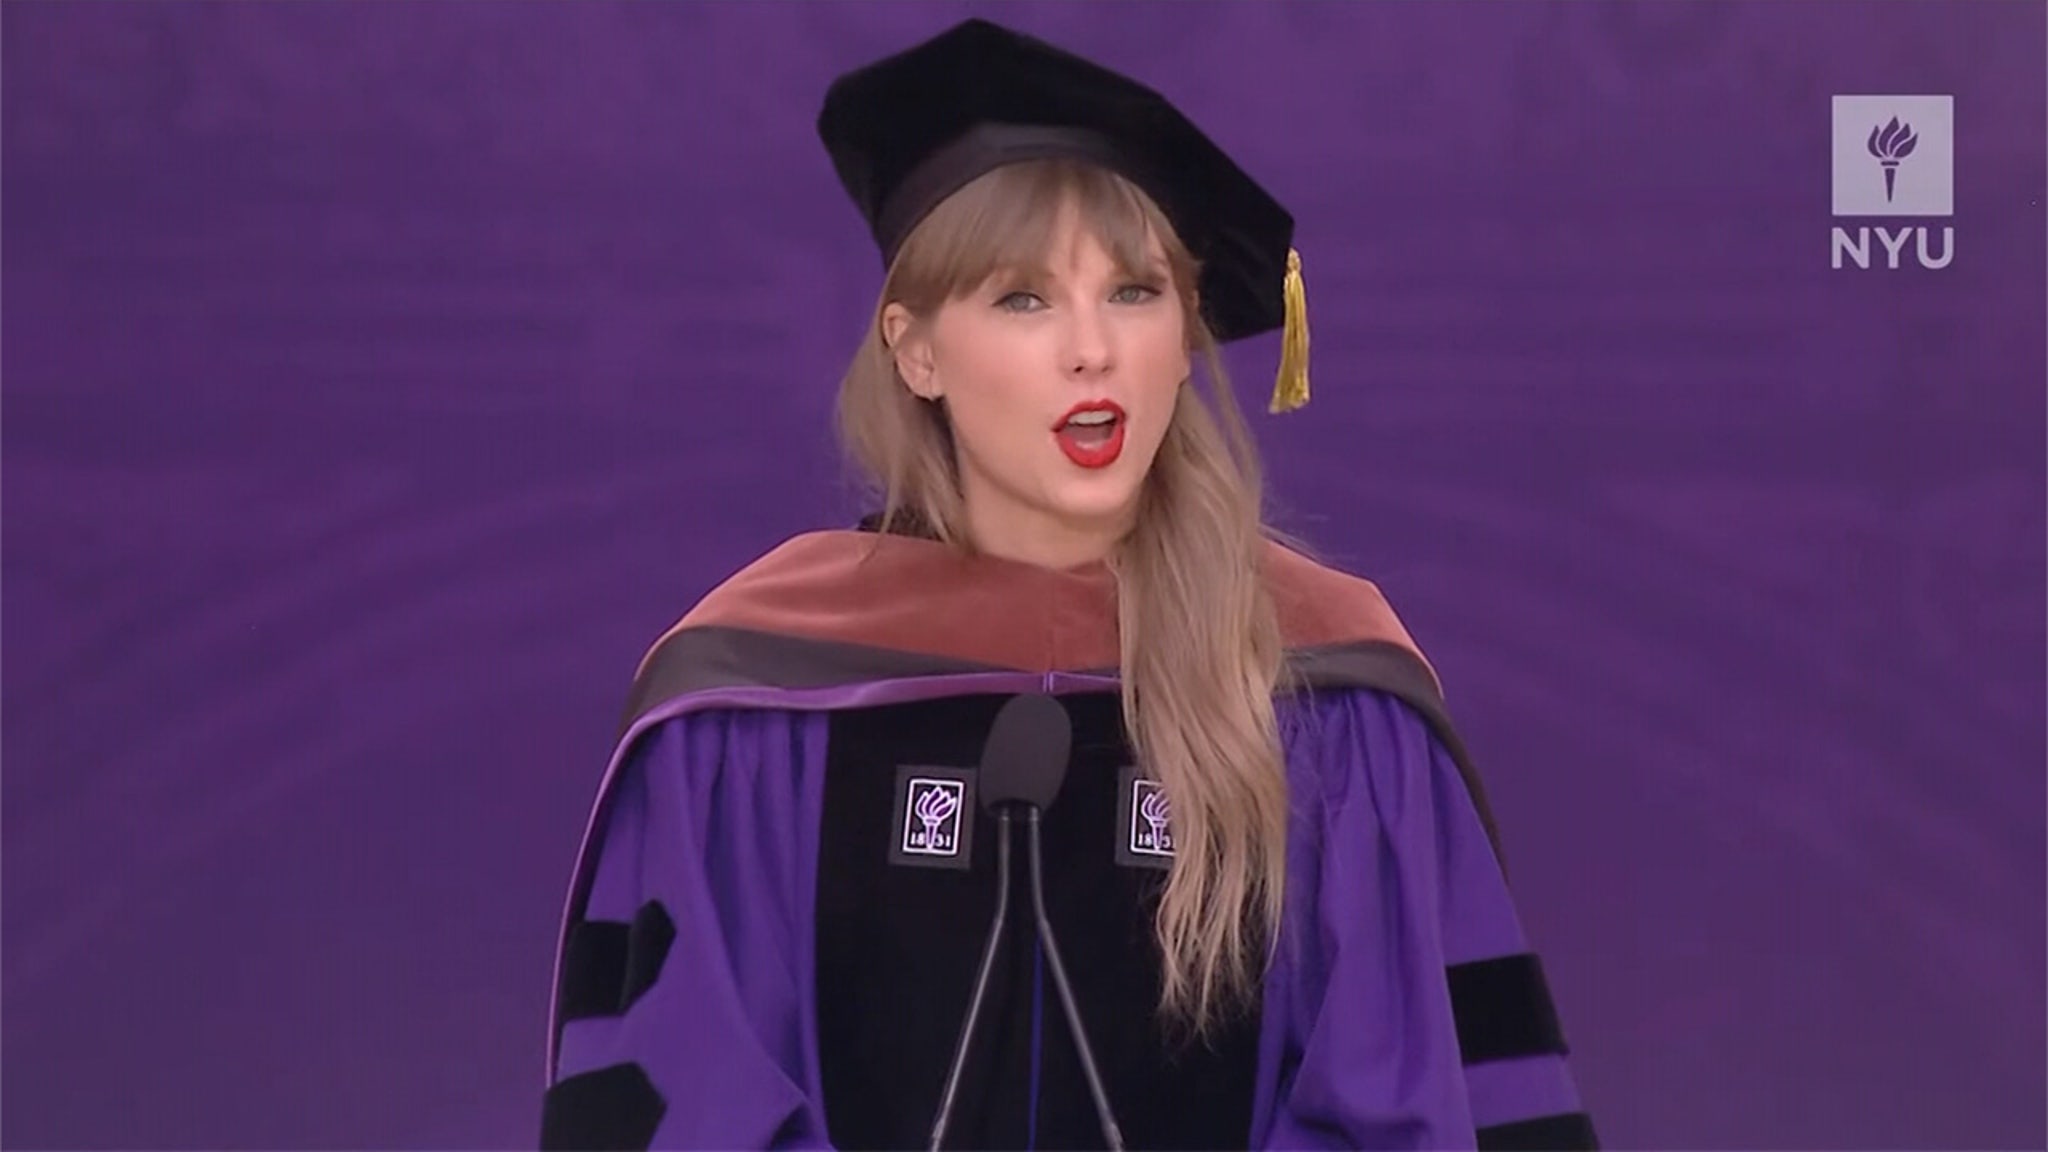 Taylor Swift's NYU Commencement Speech Subtly Addresses Cancel Culture